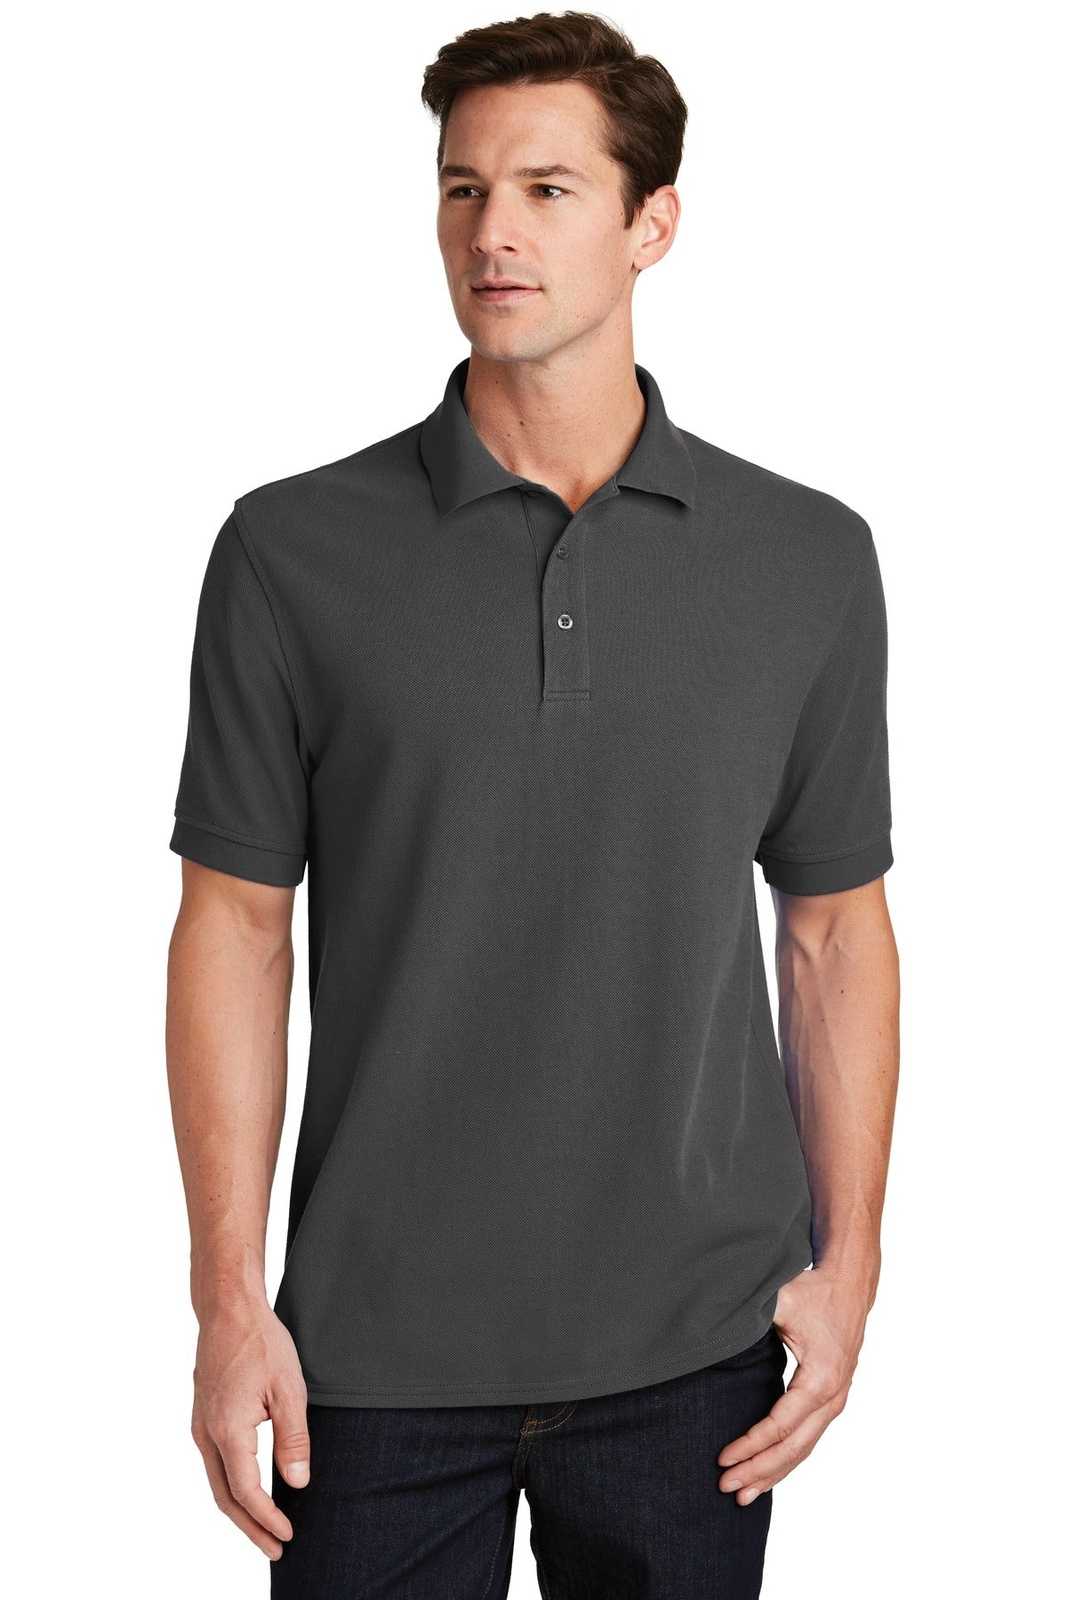 Port & Company KP1500 Combed Ring Spun Pique Polo - Charcoal - HIT a Double - 1